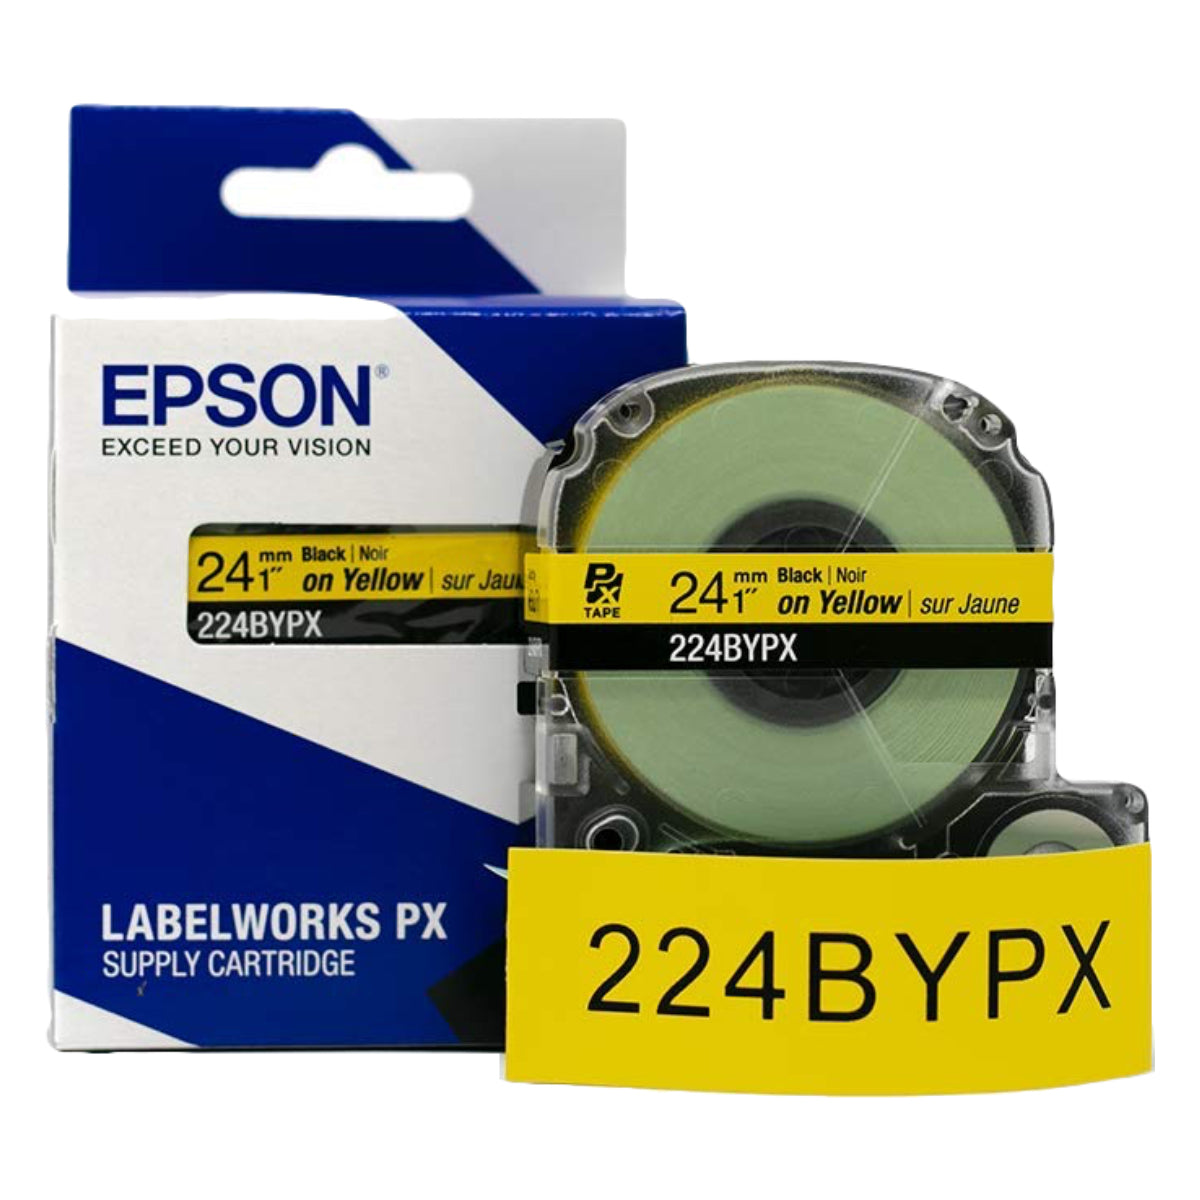 Epson LABELWORKS PX 24mm 224BYPX Tape, Black on Yellow